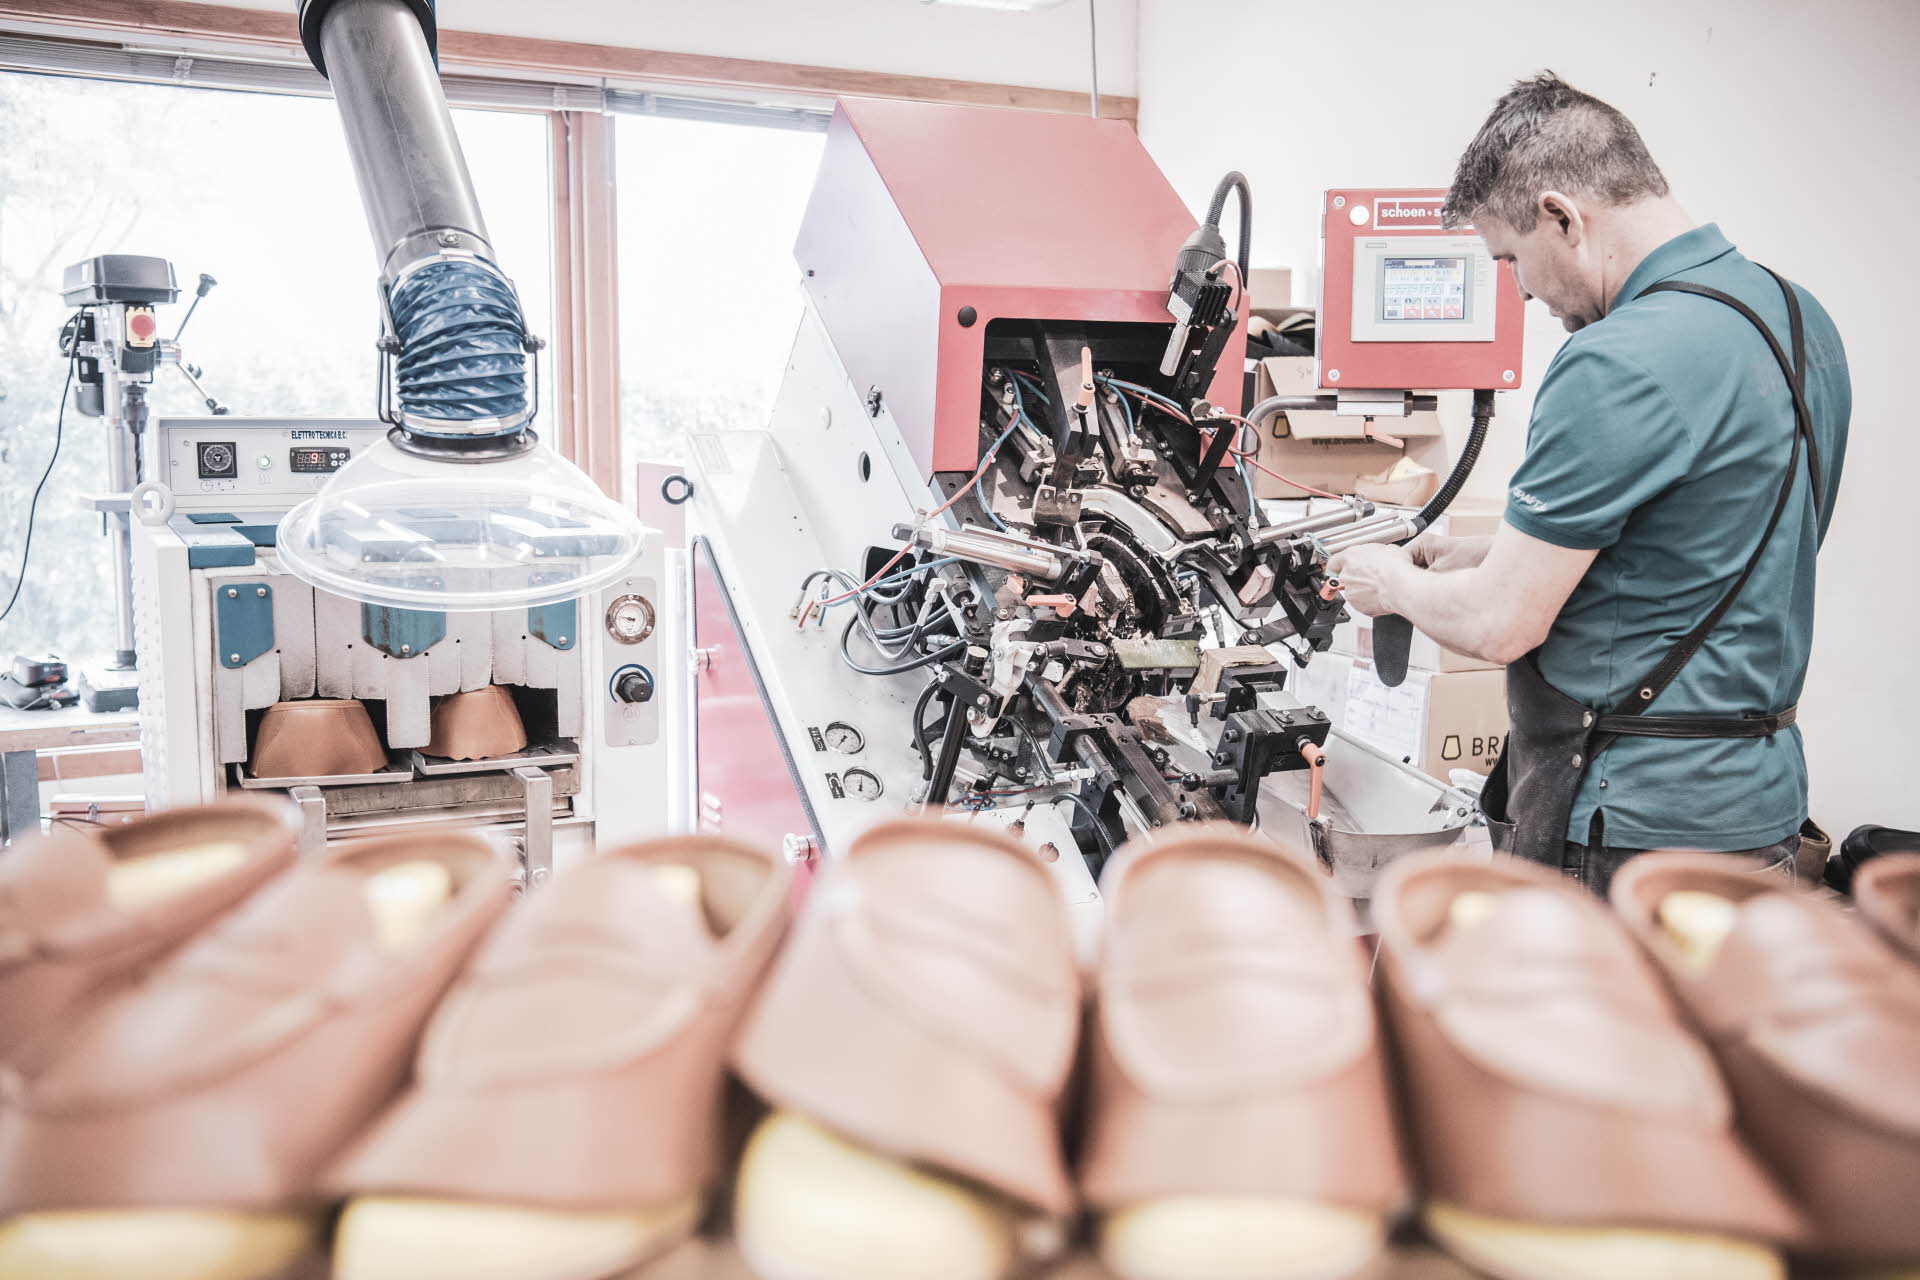 A shoemaker working on a machine behind a shelf of unfinished Aurland shoes.